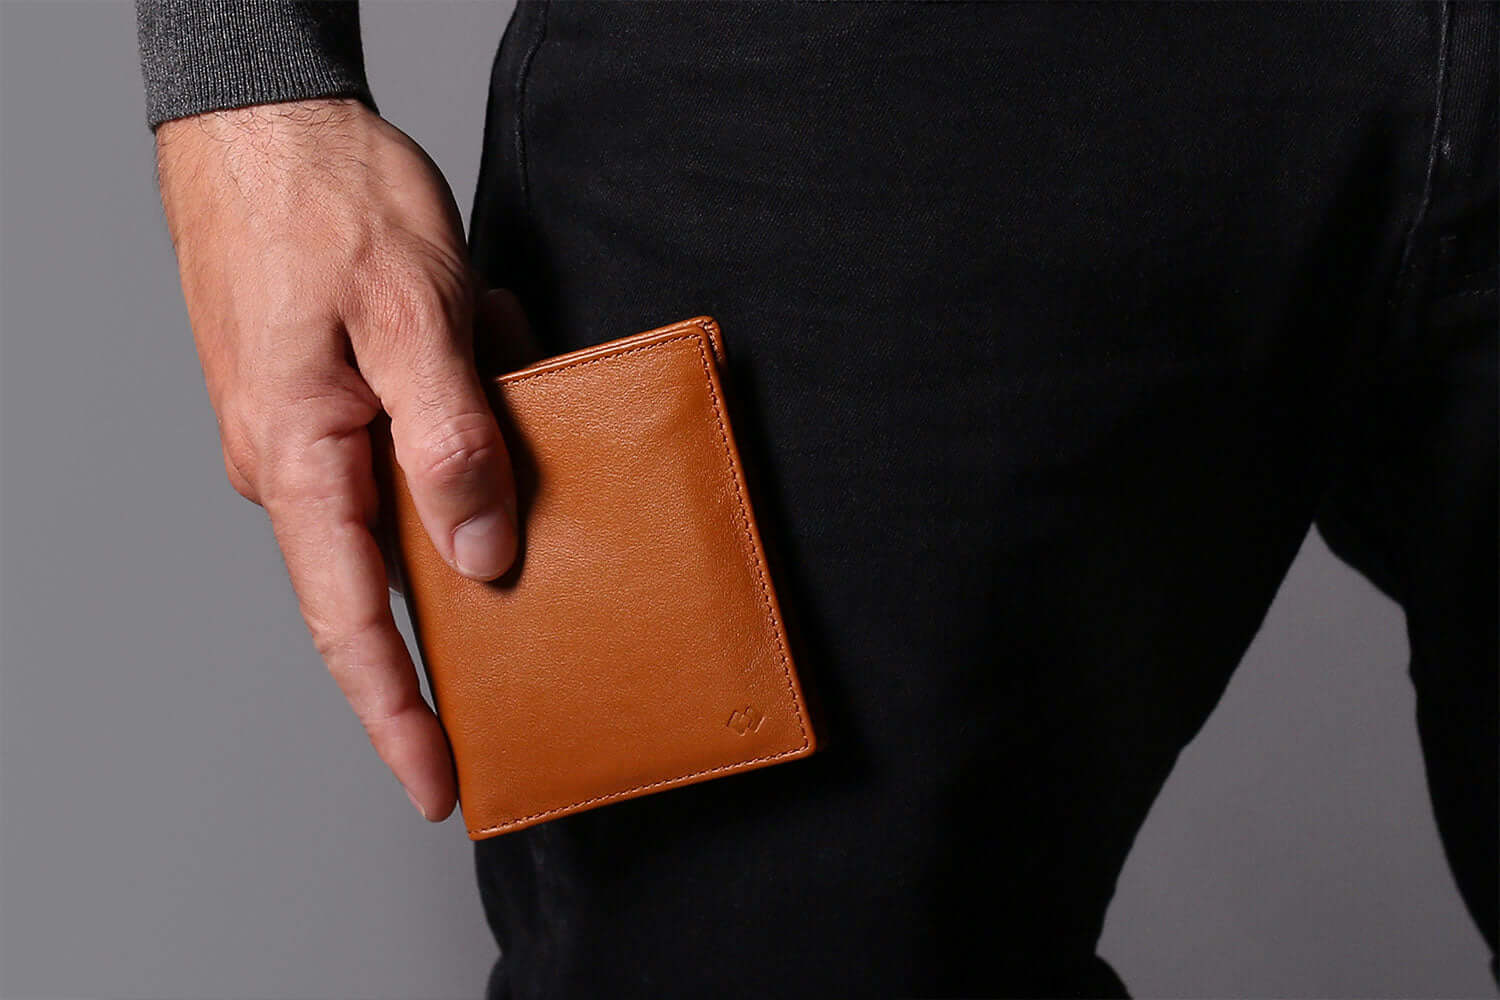 Harber London Leather Bifold Wallet with RFID Protection